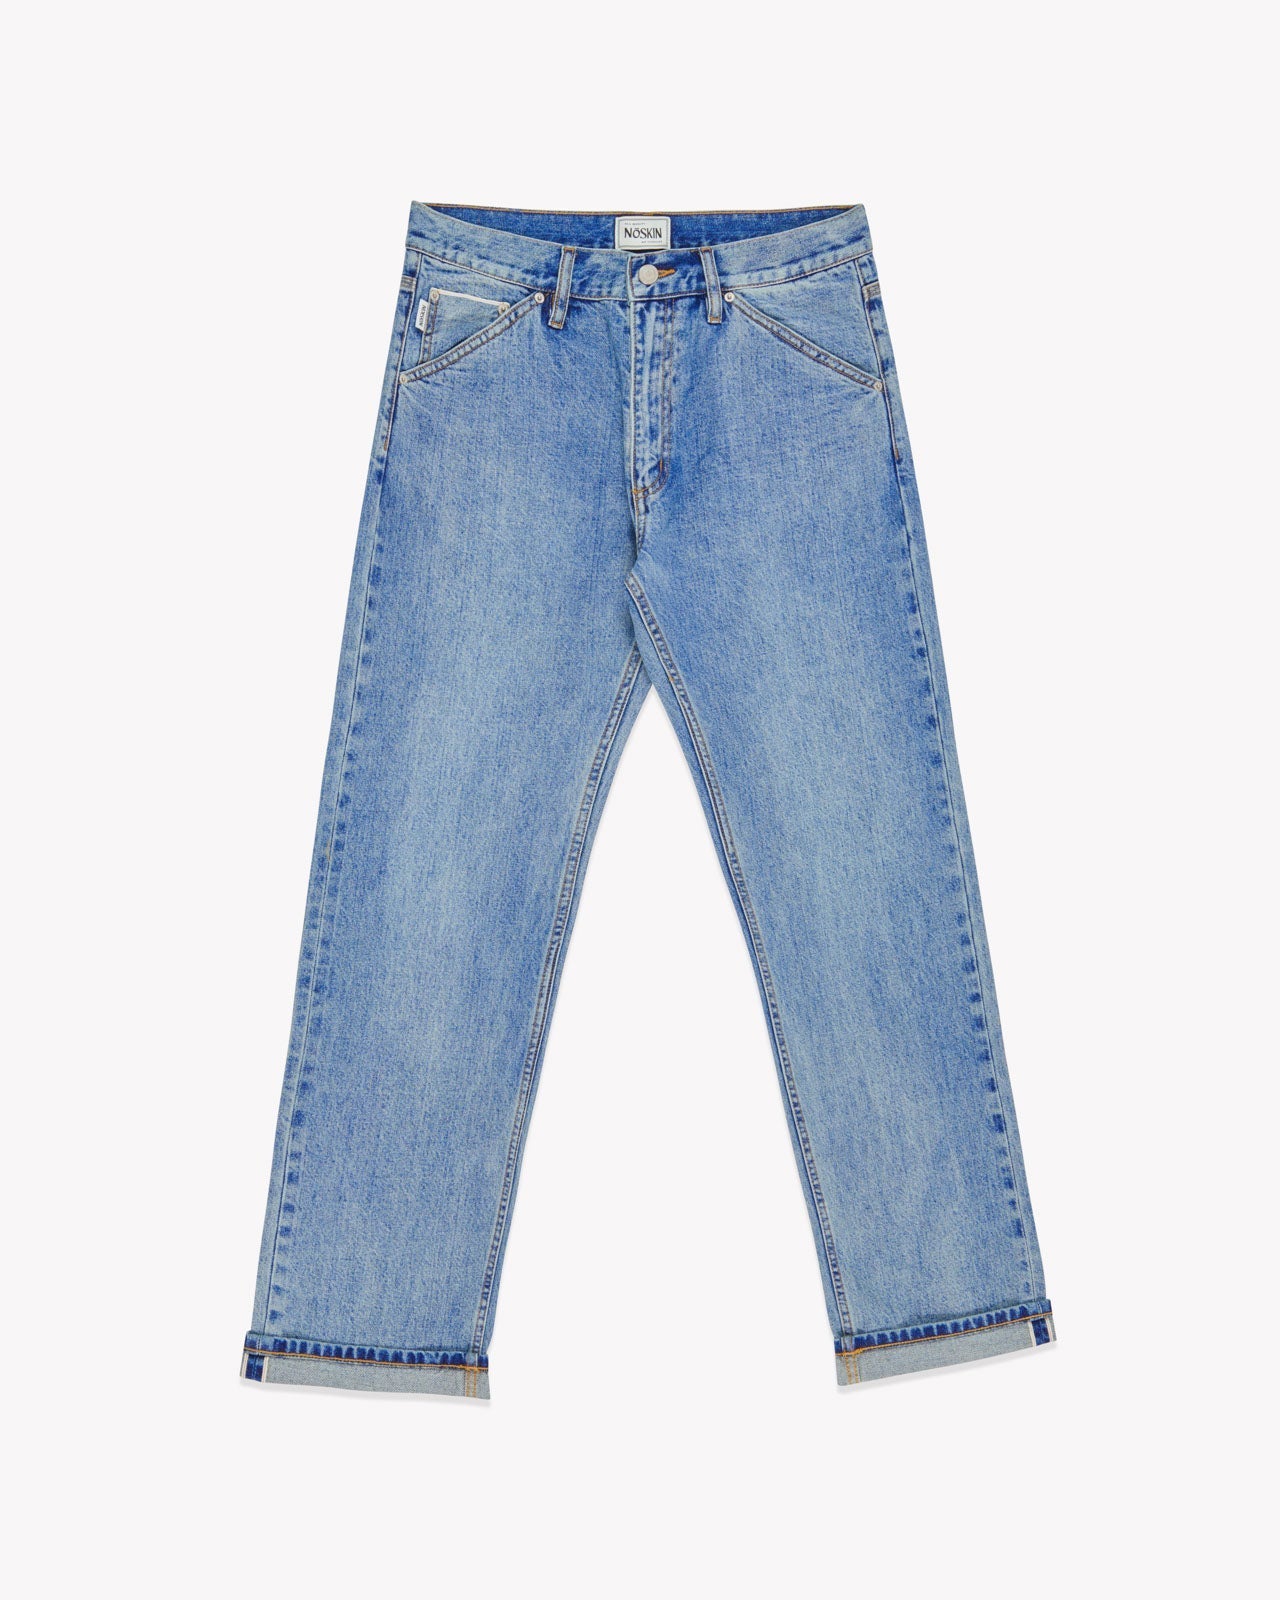 Stride Fit Mid-Wash Jeans